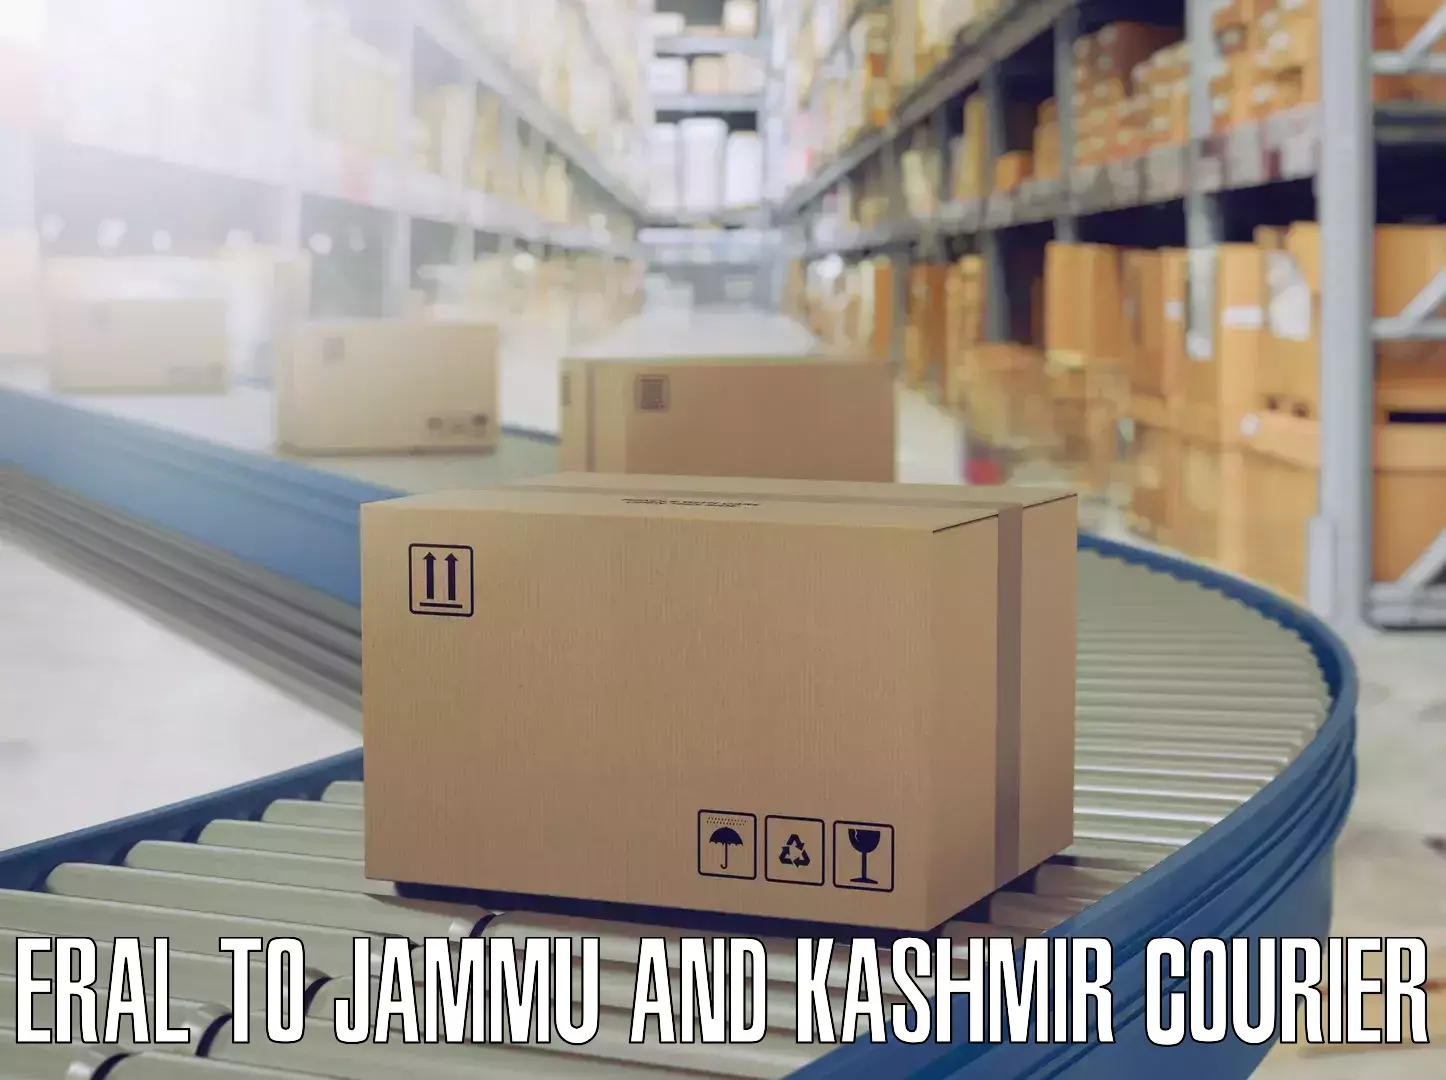 Furniture moving specialists Eral to Jammu and Kashmir